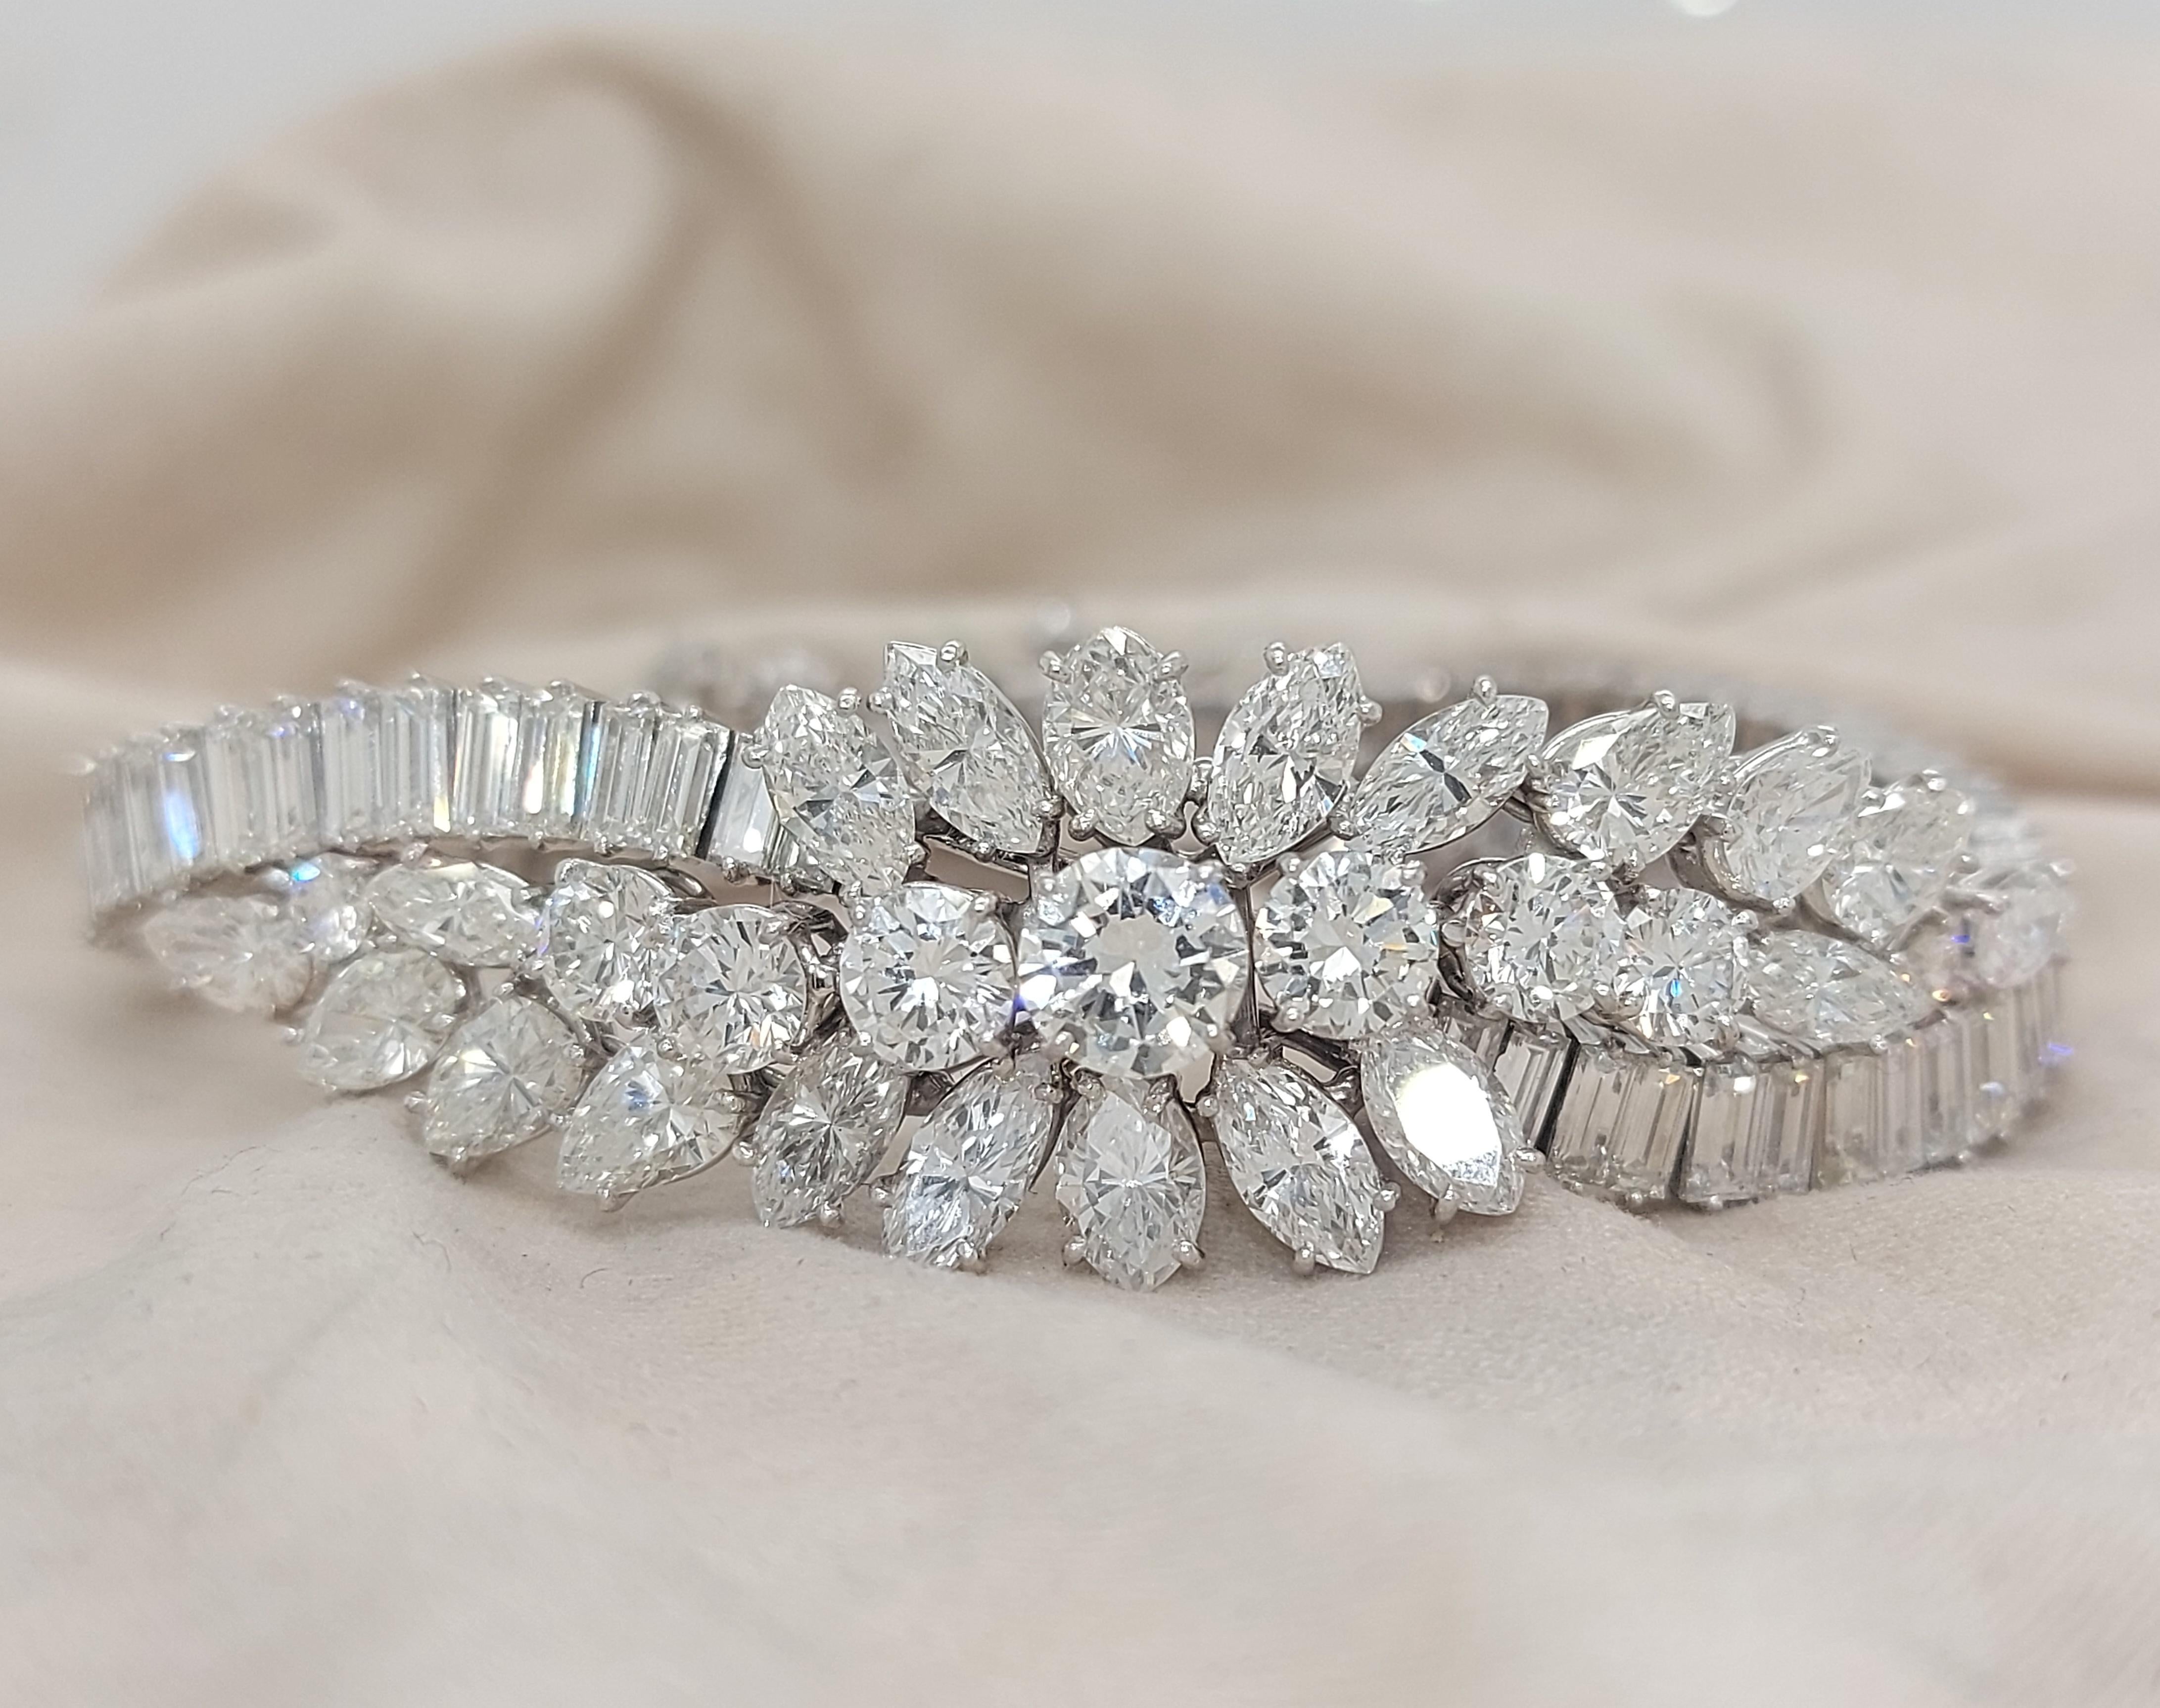 Platinum Asprey & Co Diamond Bracelet  specially made for the Queen of His Majesty Qaboos Bin Said,the sultan of Oman.

A unique completely hand crafted diamond bracelet with exclusive history !

Qaboos bin Said Al Said was Sultan of Oman from 23